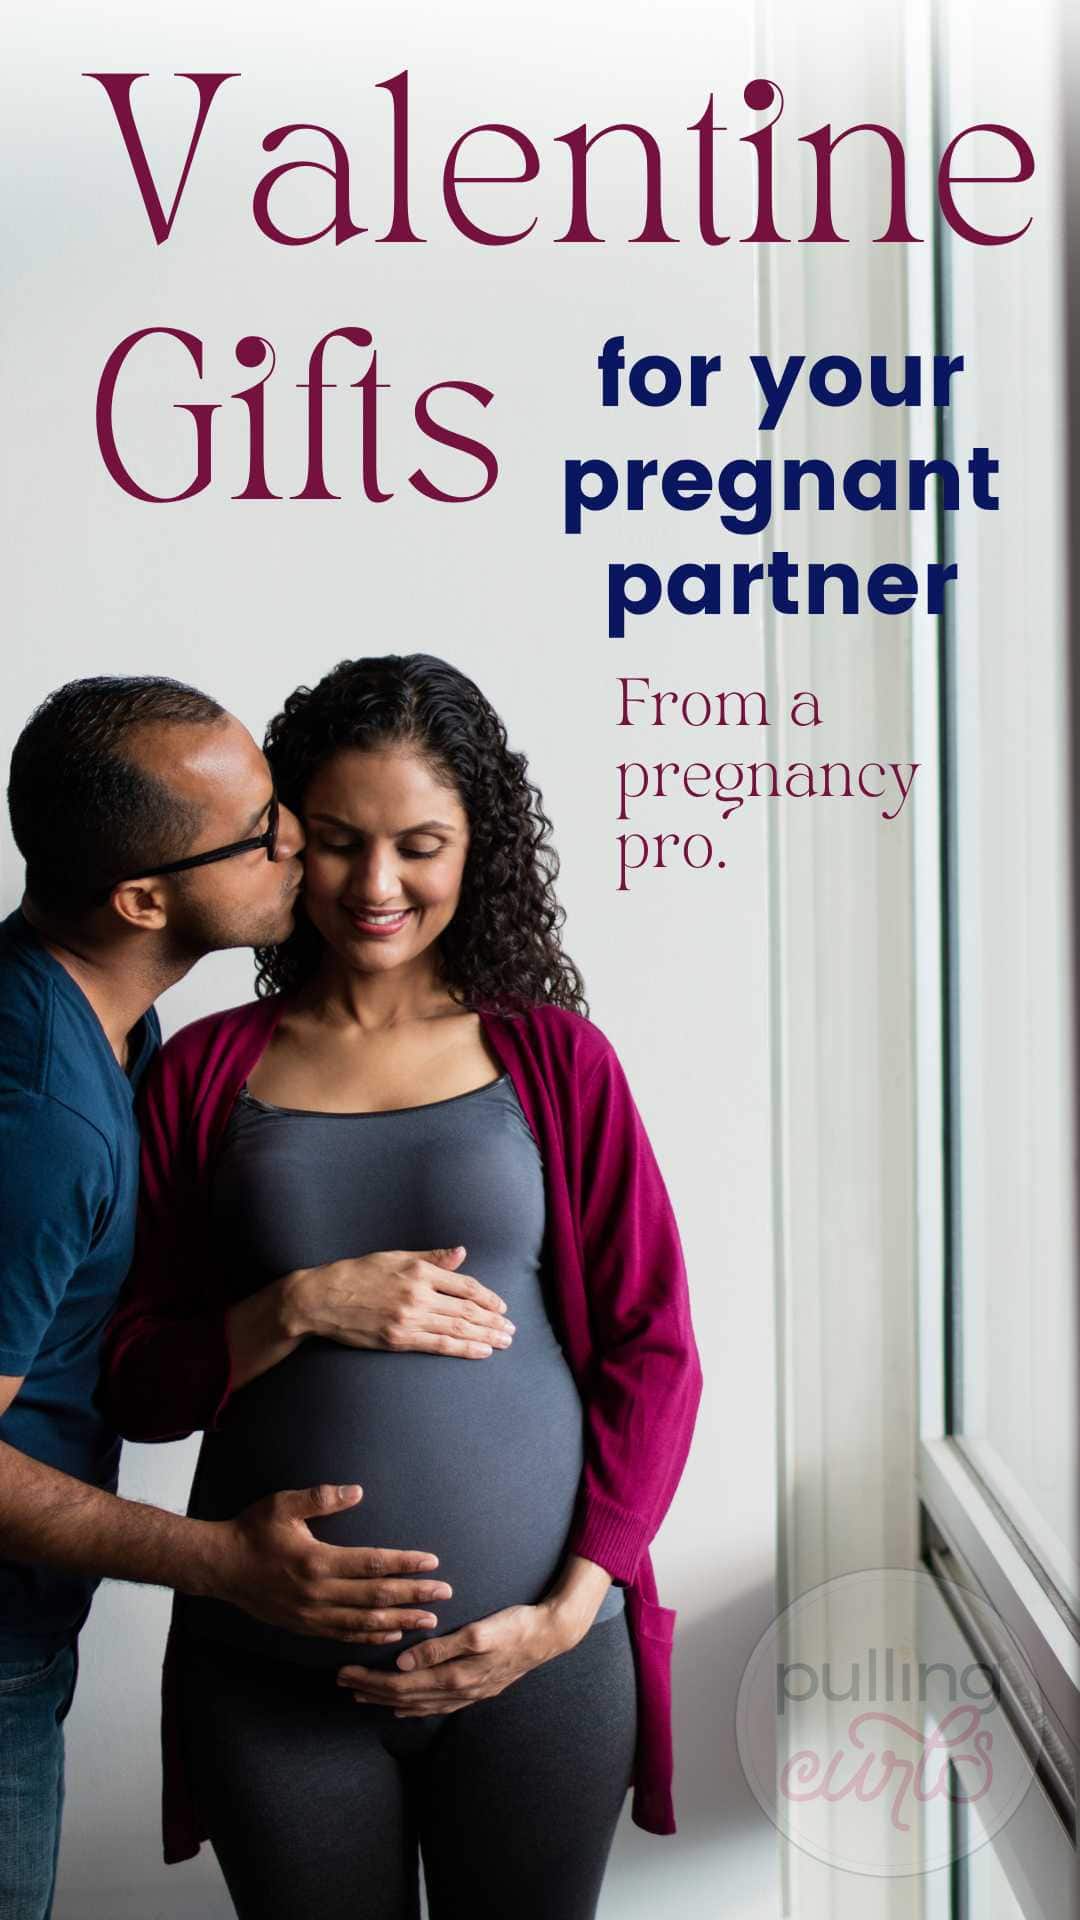 Pregnancy is a time of change and growth. Show your pregnant loved one how much you appreciate her with one of these ten gifts. From prenatal classes to cozy pajamas, these presents will help make her pregnancy comfortable and special. via @pullingcurls